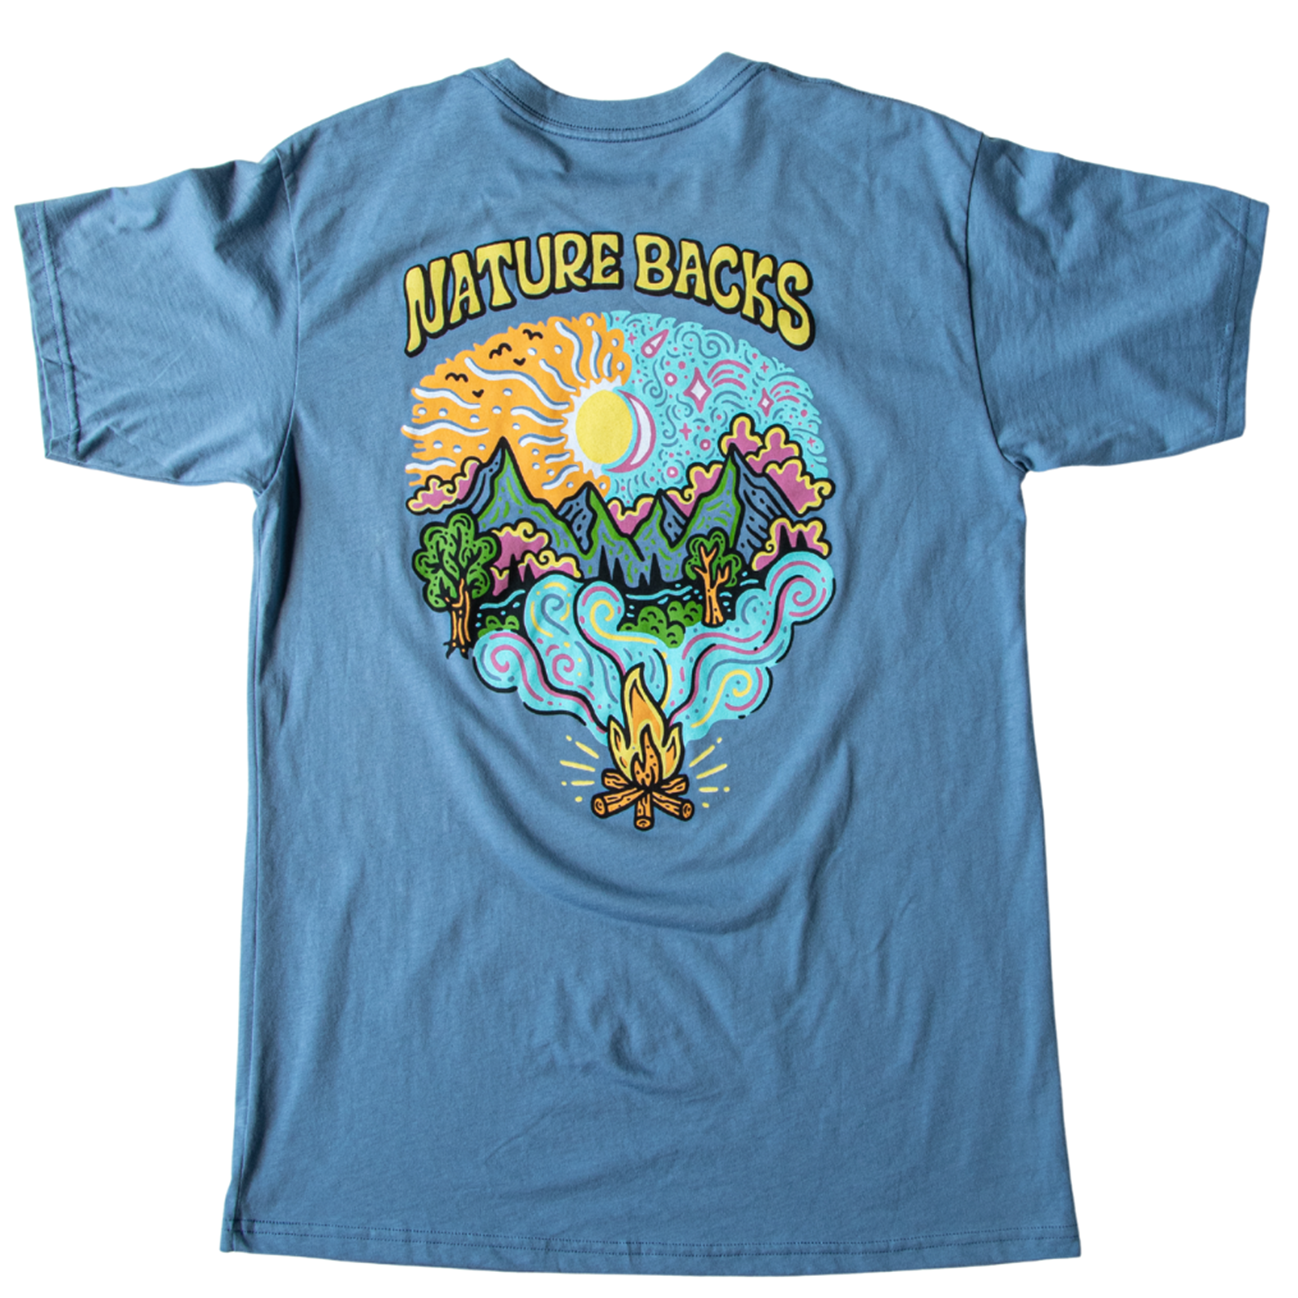 Nature Backs Limited Edition Short Sleeve 100% Organic Cotton T-Shirt | Limited Ember Fog Short Sleeve made with Eco-Friendly Fibers Sustainably made in the USA 